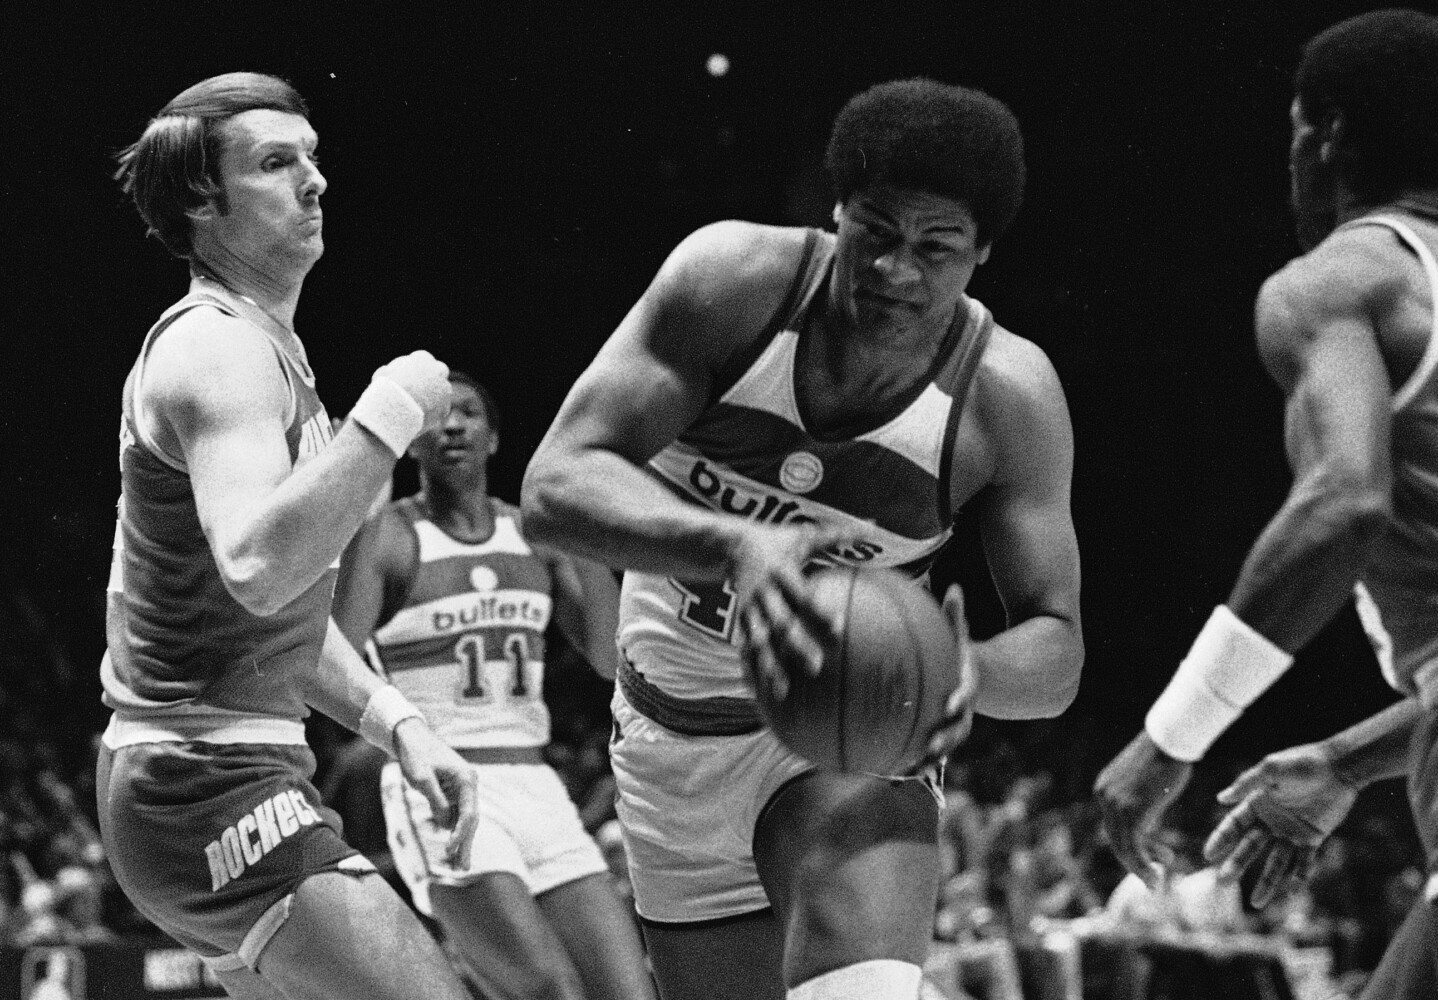 BOZICH, Friends remember Wes Unseld as great player, greater man, Sports